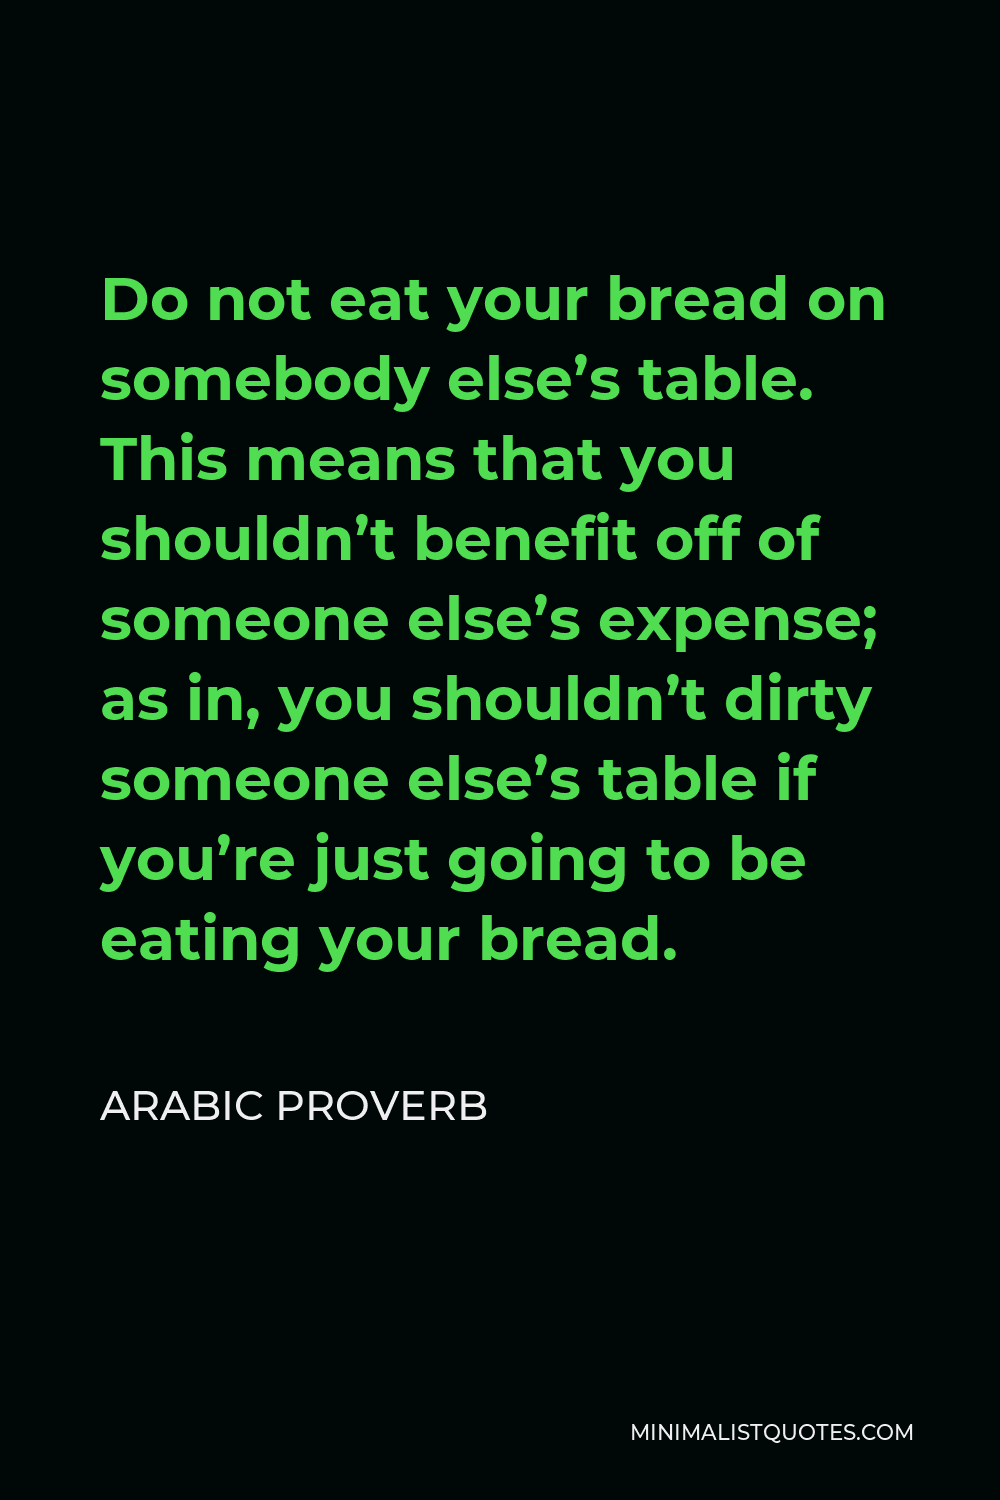 Arabic Proverb Quote - Do not eat your bread on somebody else’s table. This means that you shouldn’t benefit off of someone else’s expense; as in, you shouldn’t dirty someone else’s table if you’re just going to be eating your bread.